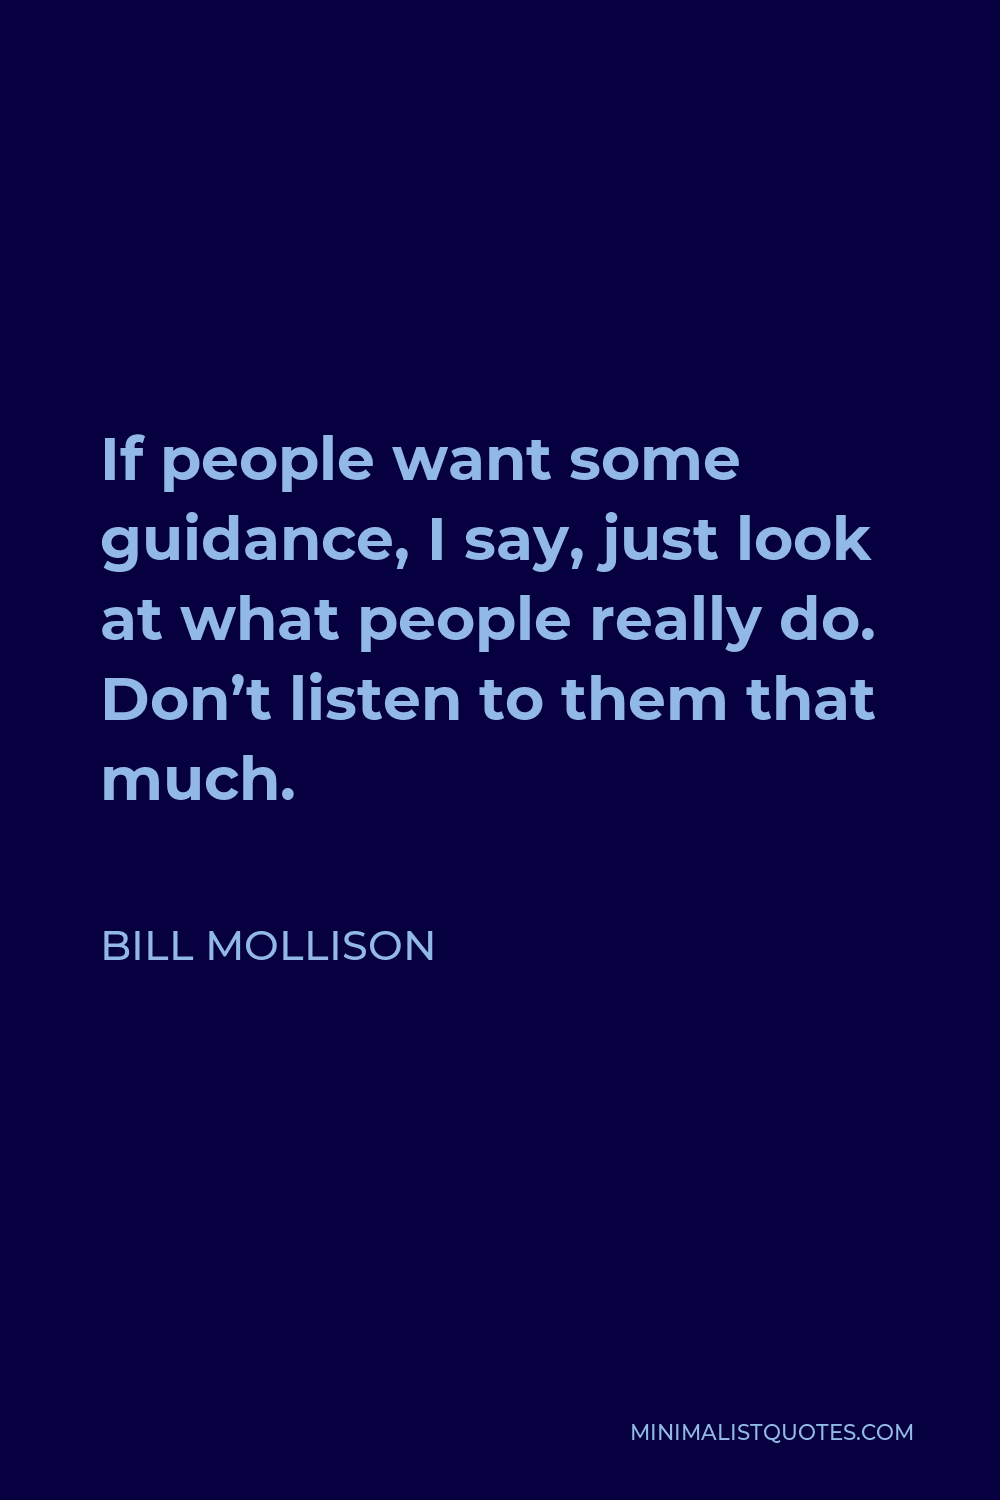 Bill Mollison Quote - If people want some guidance, I say, just look at what people really do. Don’t listen to them that much.